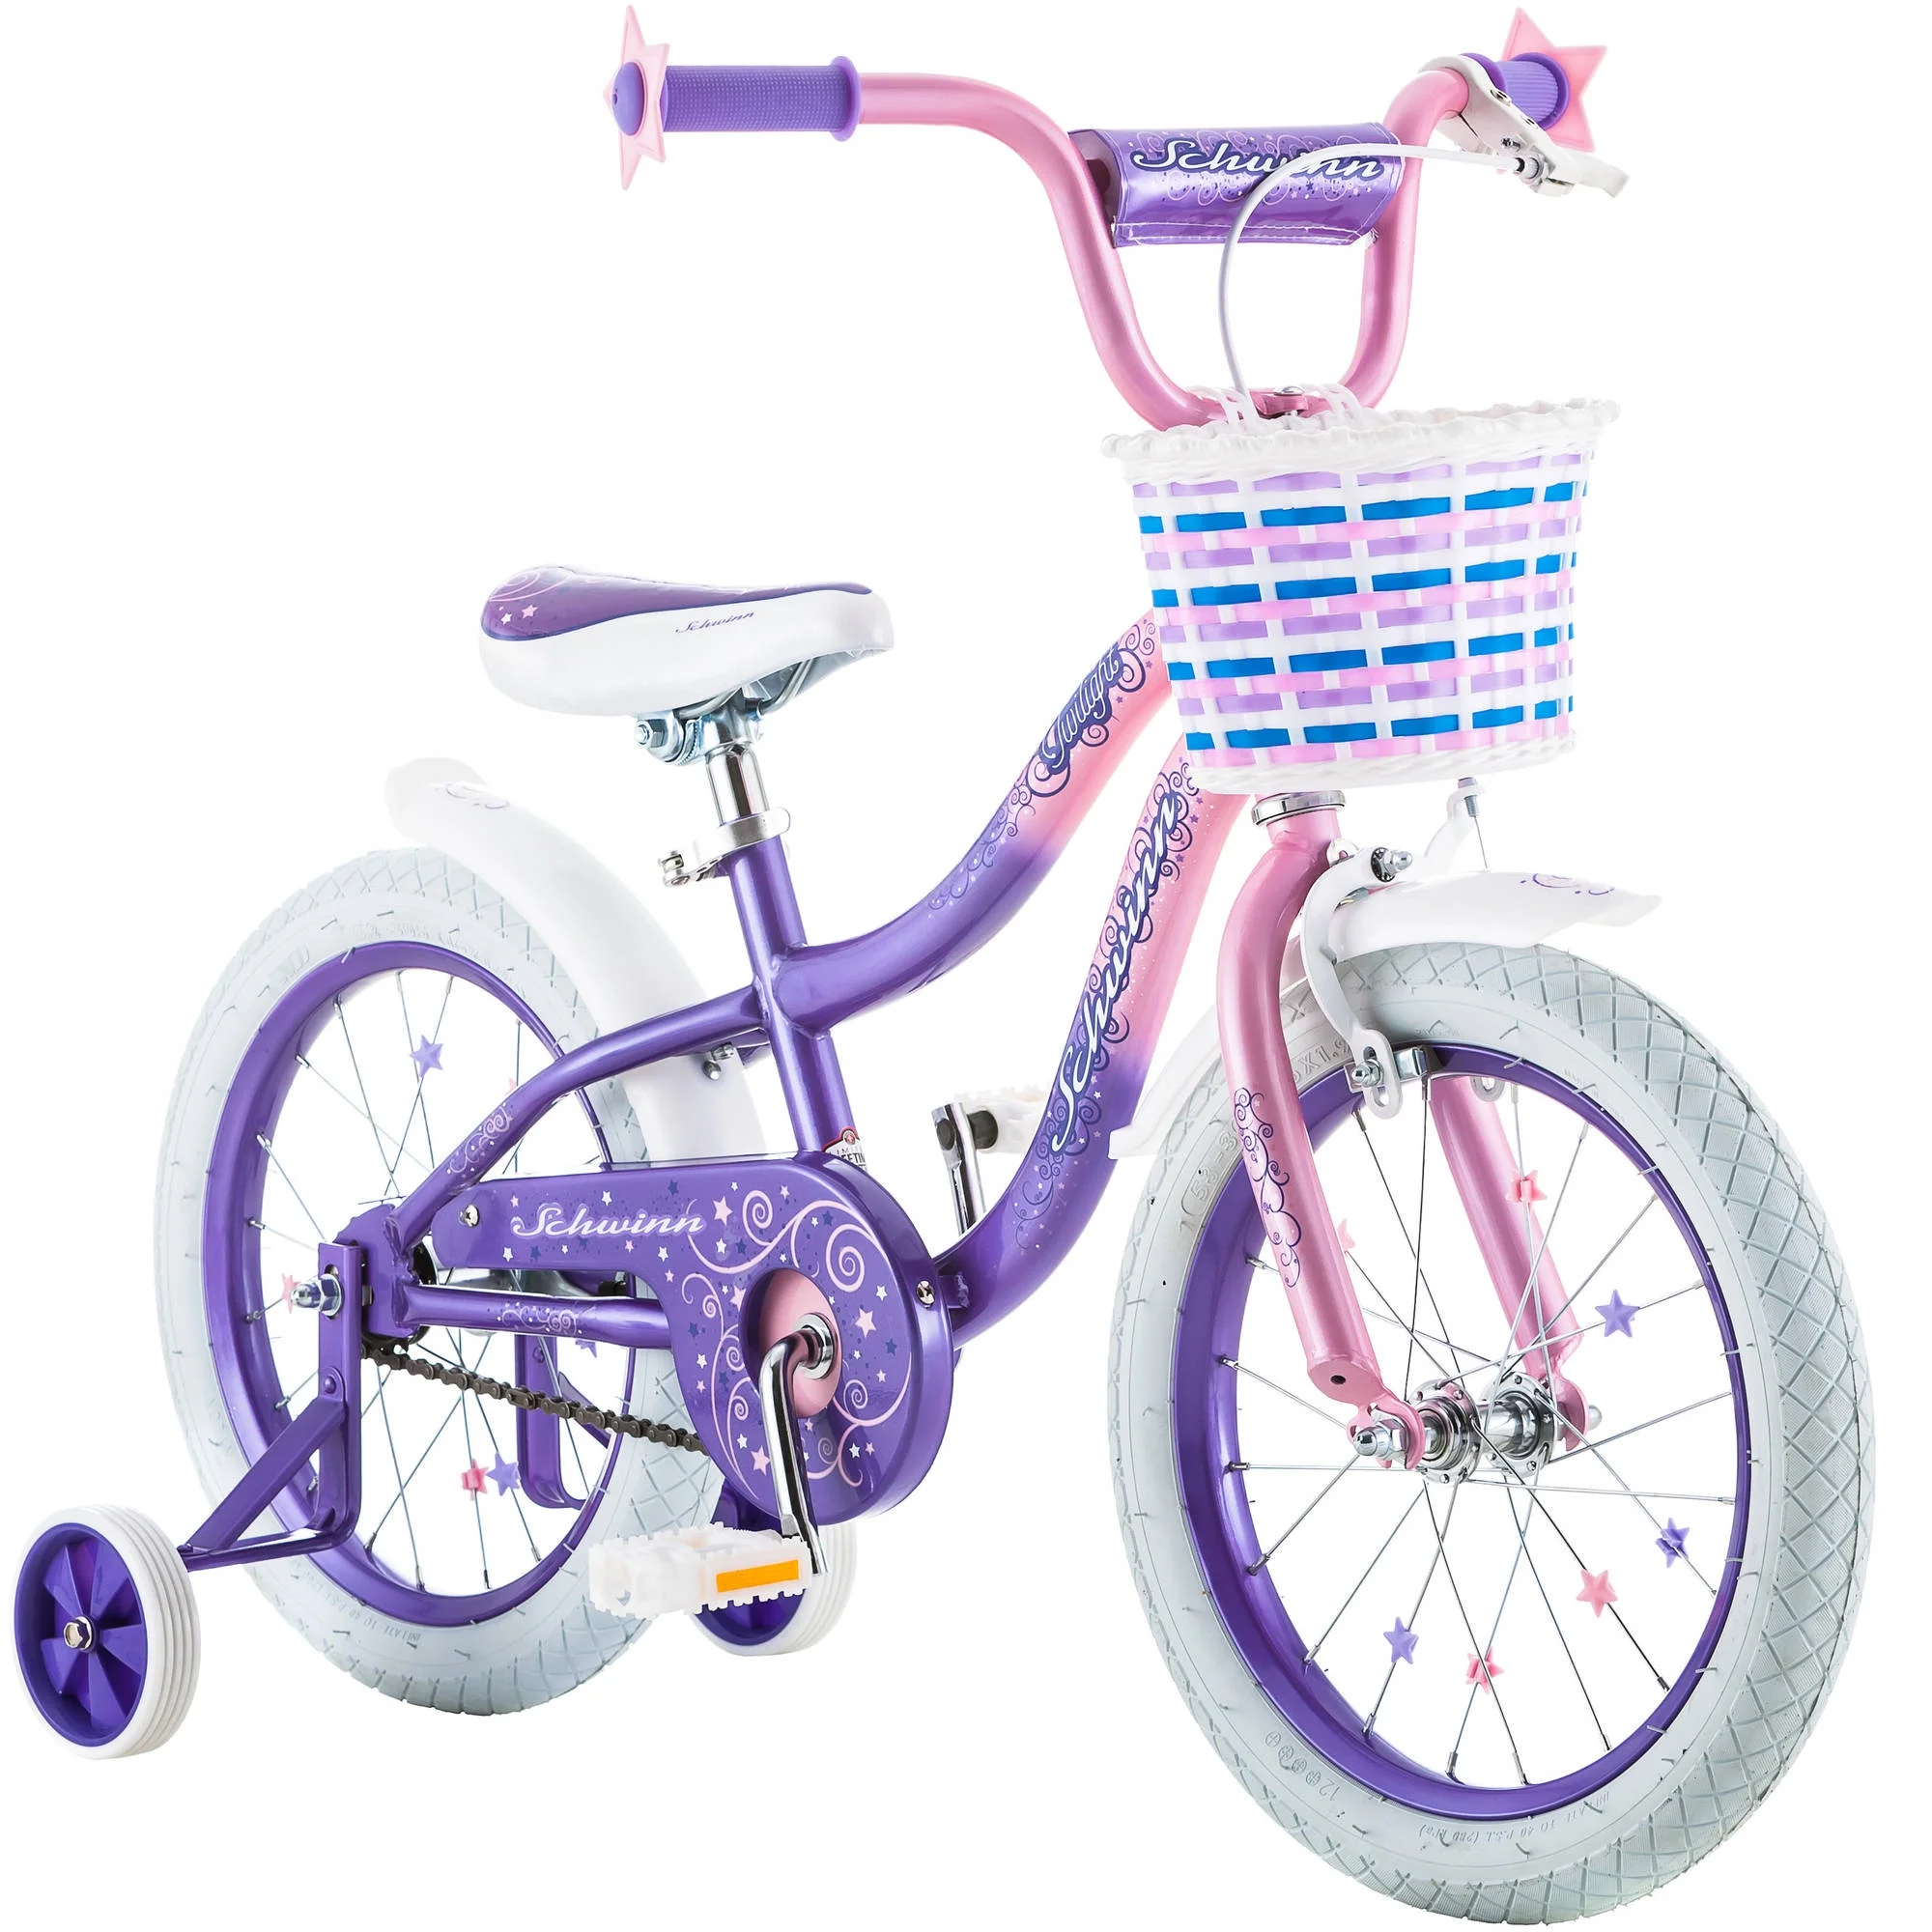 16 inch bike with doll carrier